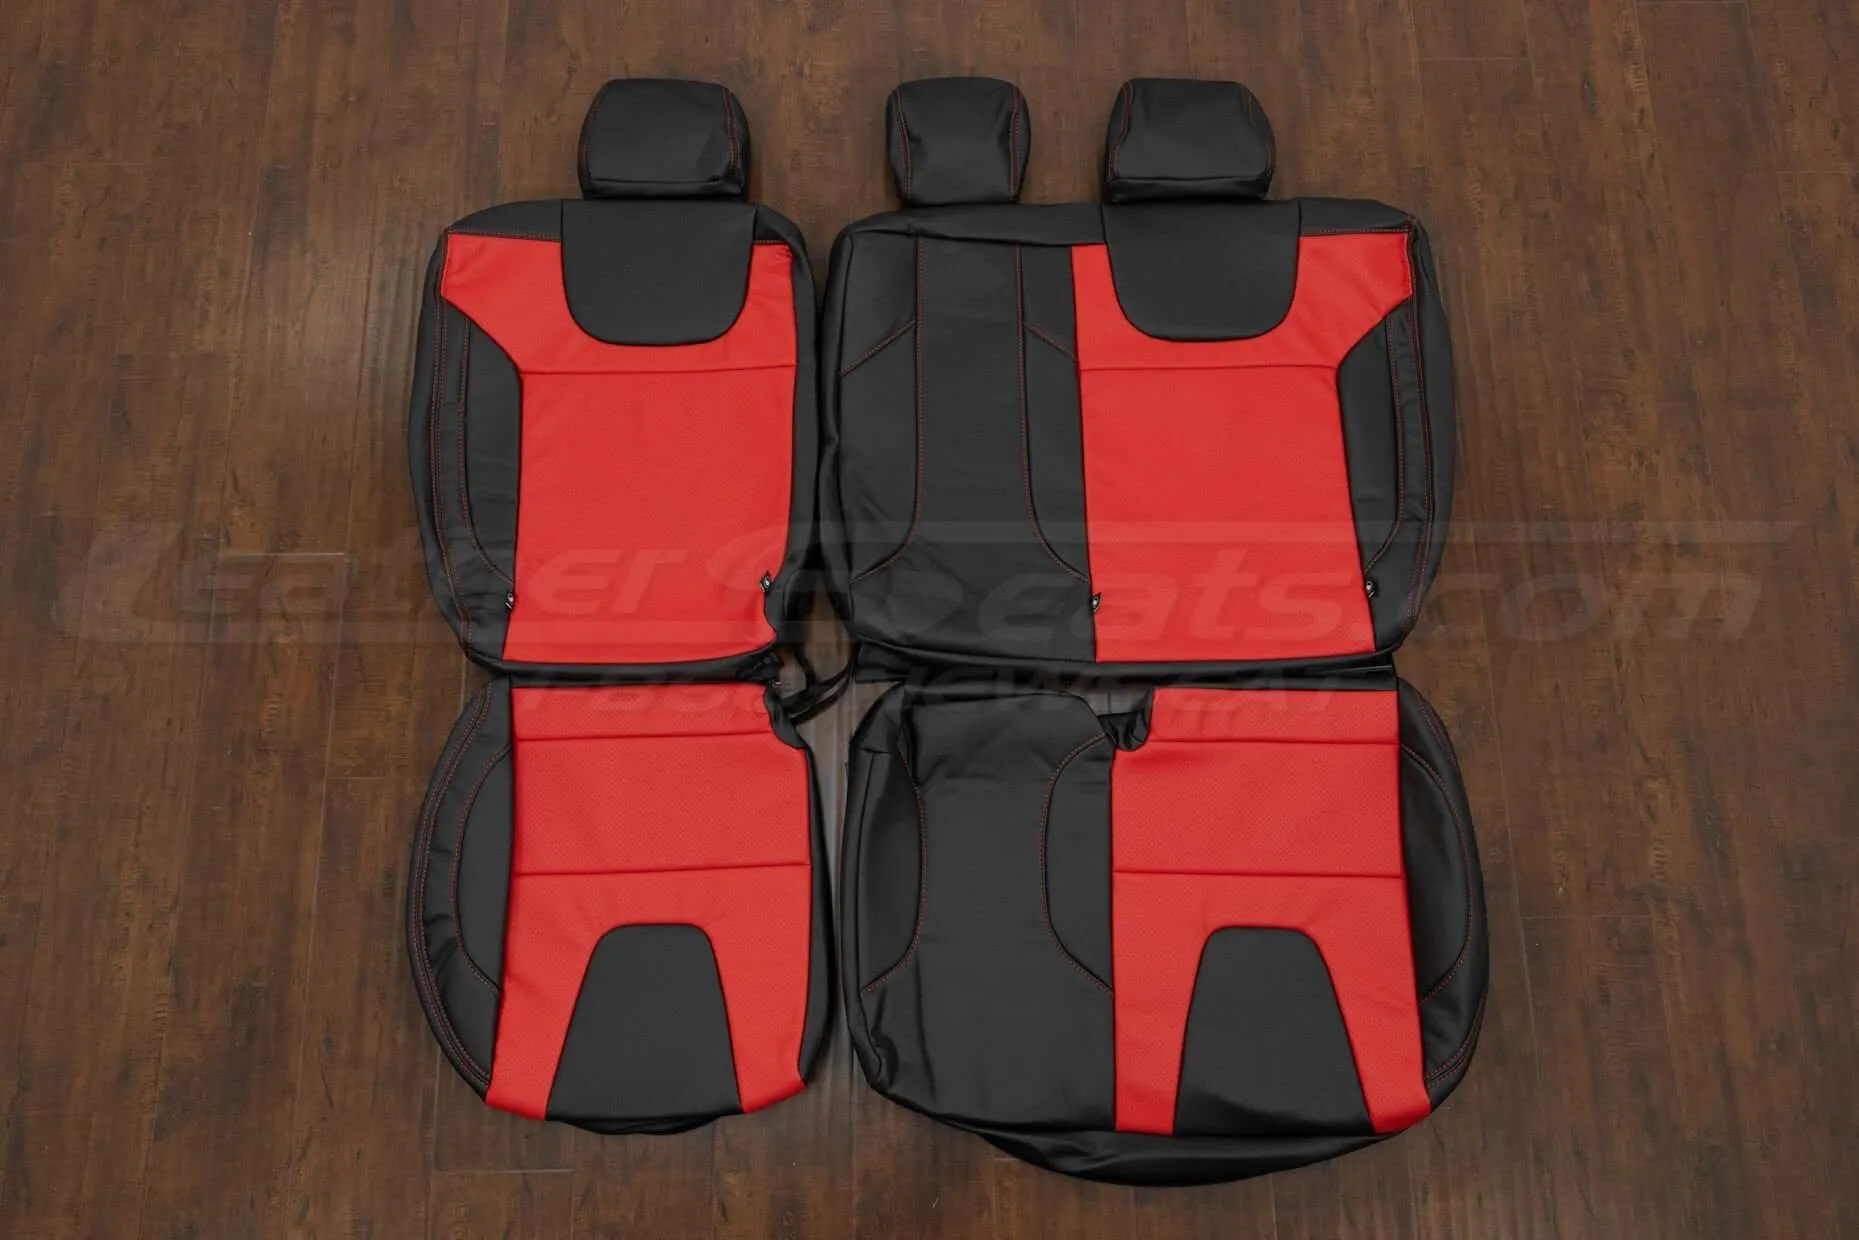 2018 Ford Focus Leather Seat Kit in Black & Bright Red - Rear seat upholstery